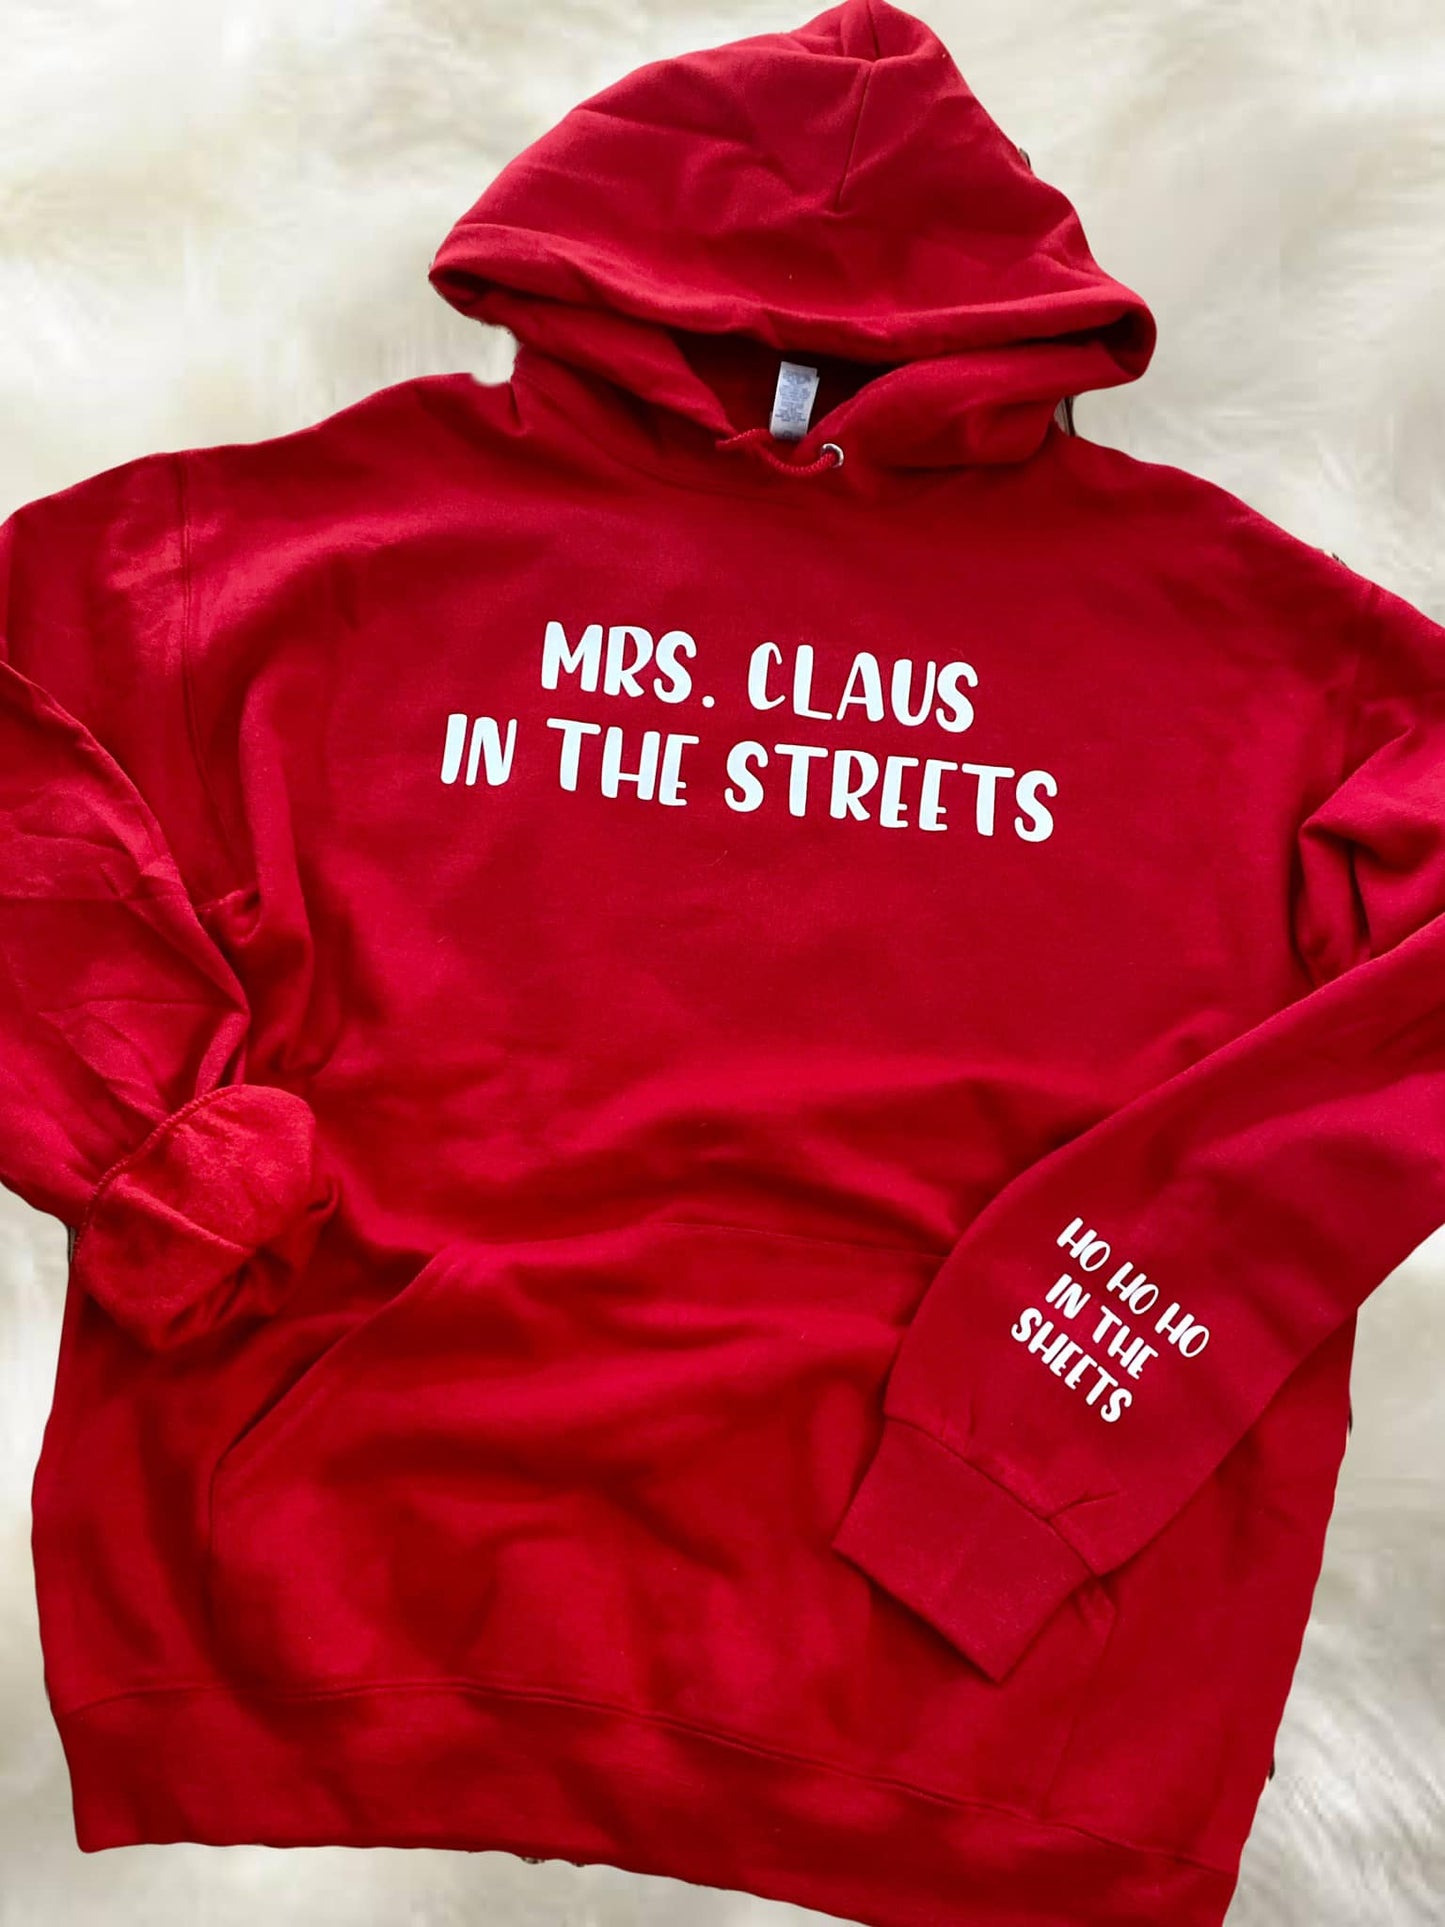 Mrs. Claus in the streets Hoodie